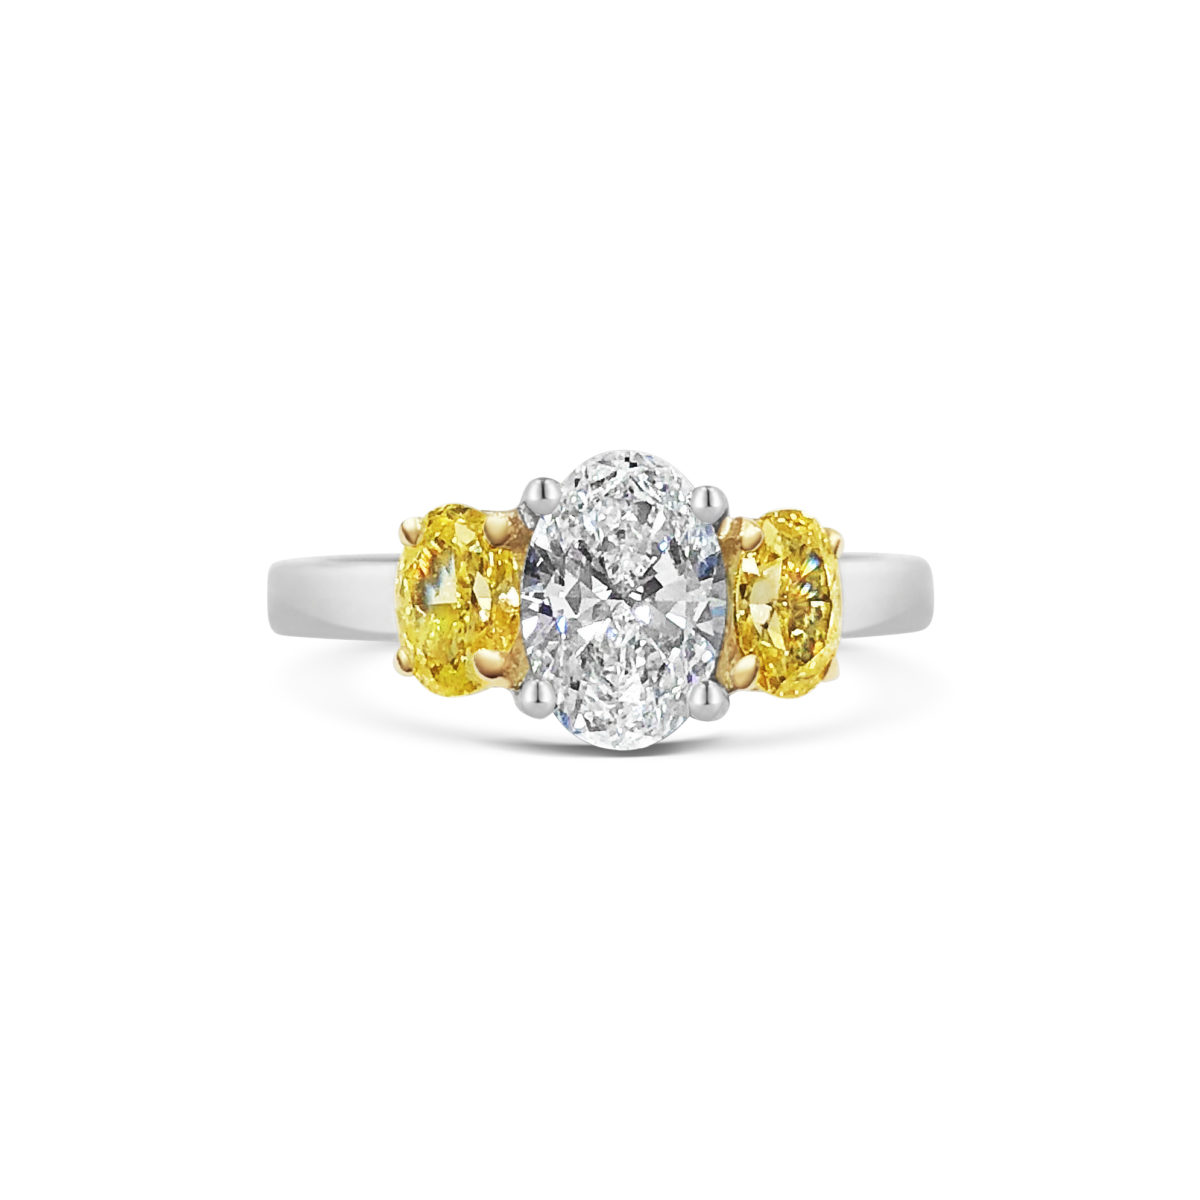 Gabrielle Oval Cut Diamond with Natural Fancy Yellow Oval Diamonds Three Stone Ring